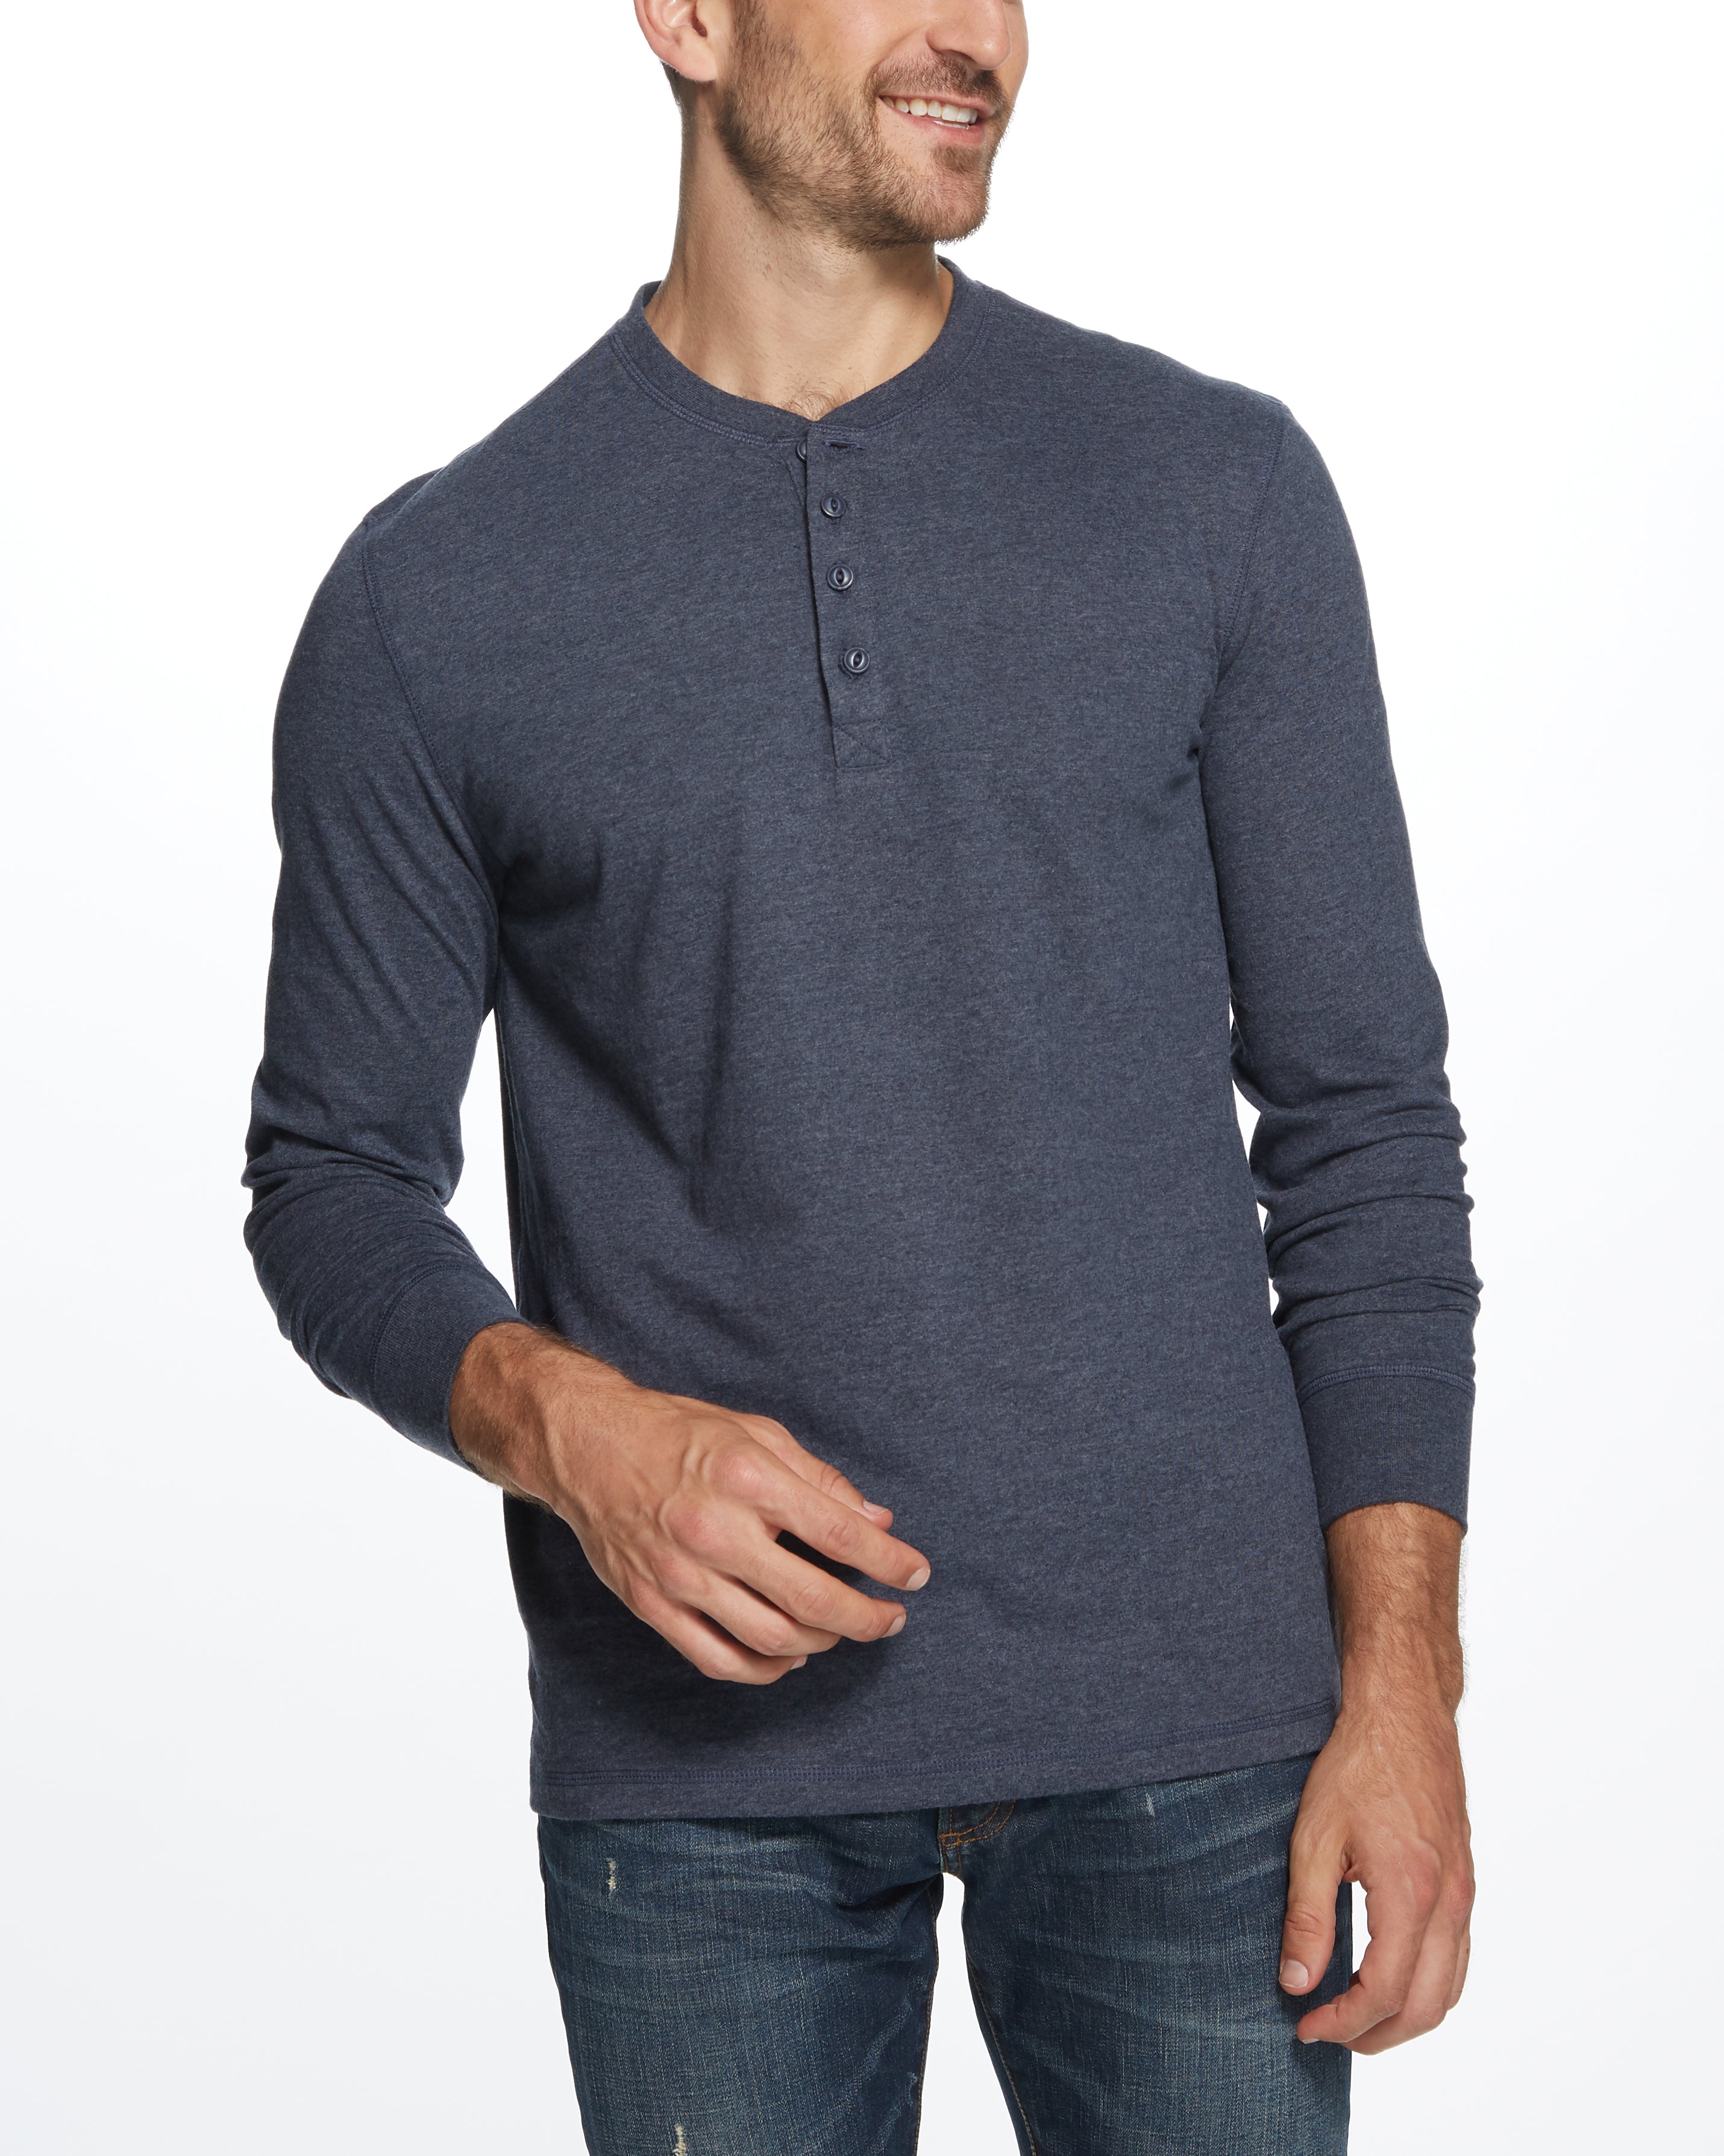 L/S BRUSHED JERSEY HENLEY in MARITIME BLUE